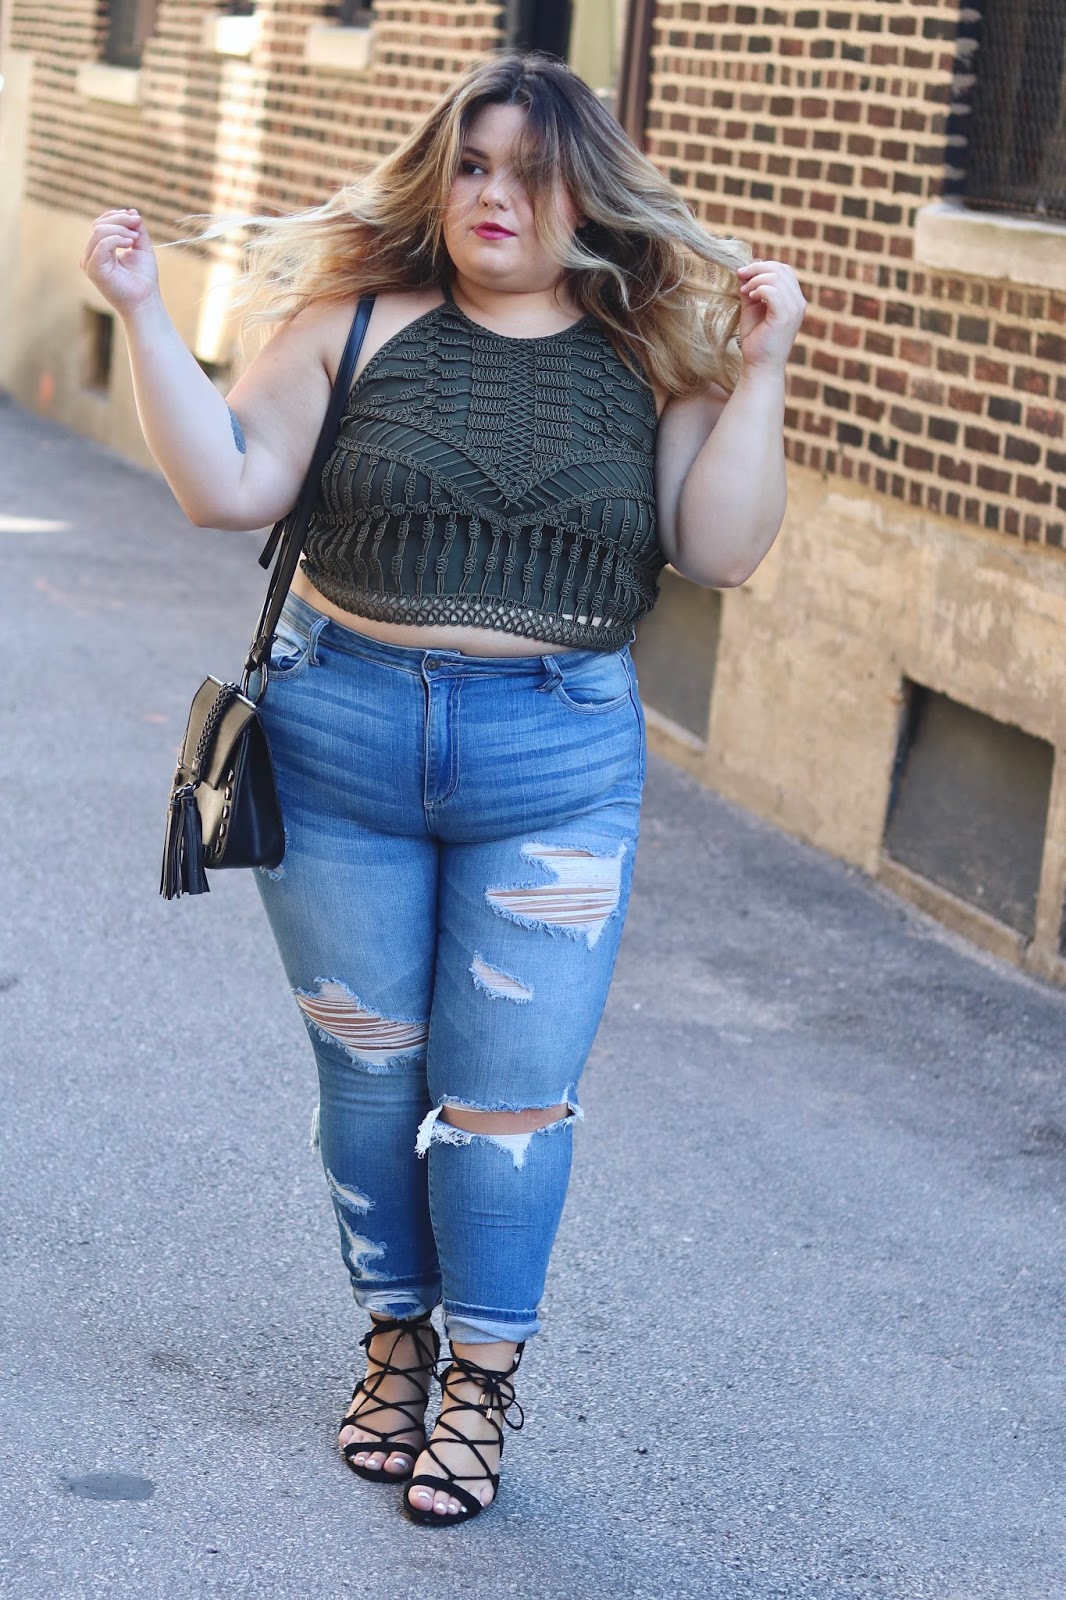 cello jeans, affordable plus size denim, plus size jeans, affordable plus size clothing, H&M plus sizes, how to hide my stomach pouch, plus size fashion blogger, Chicago blogger, natalie in the city, natalie craig, sunglass up, destroyed denim, curves and confidence,